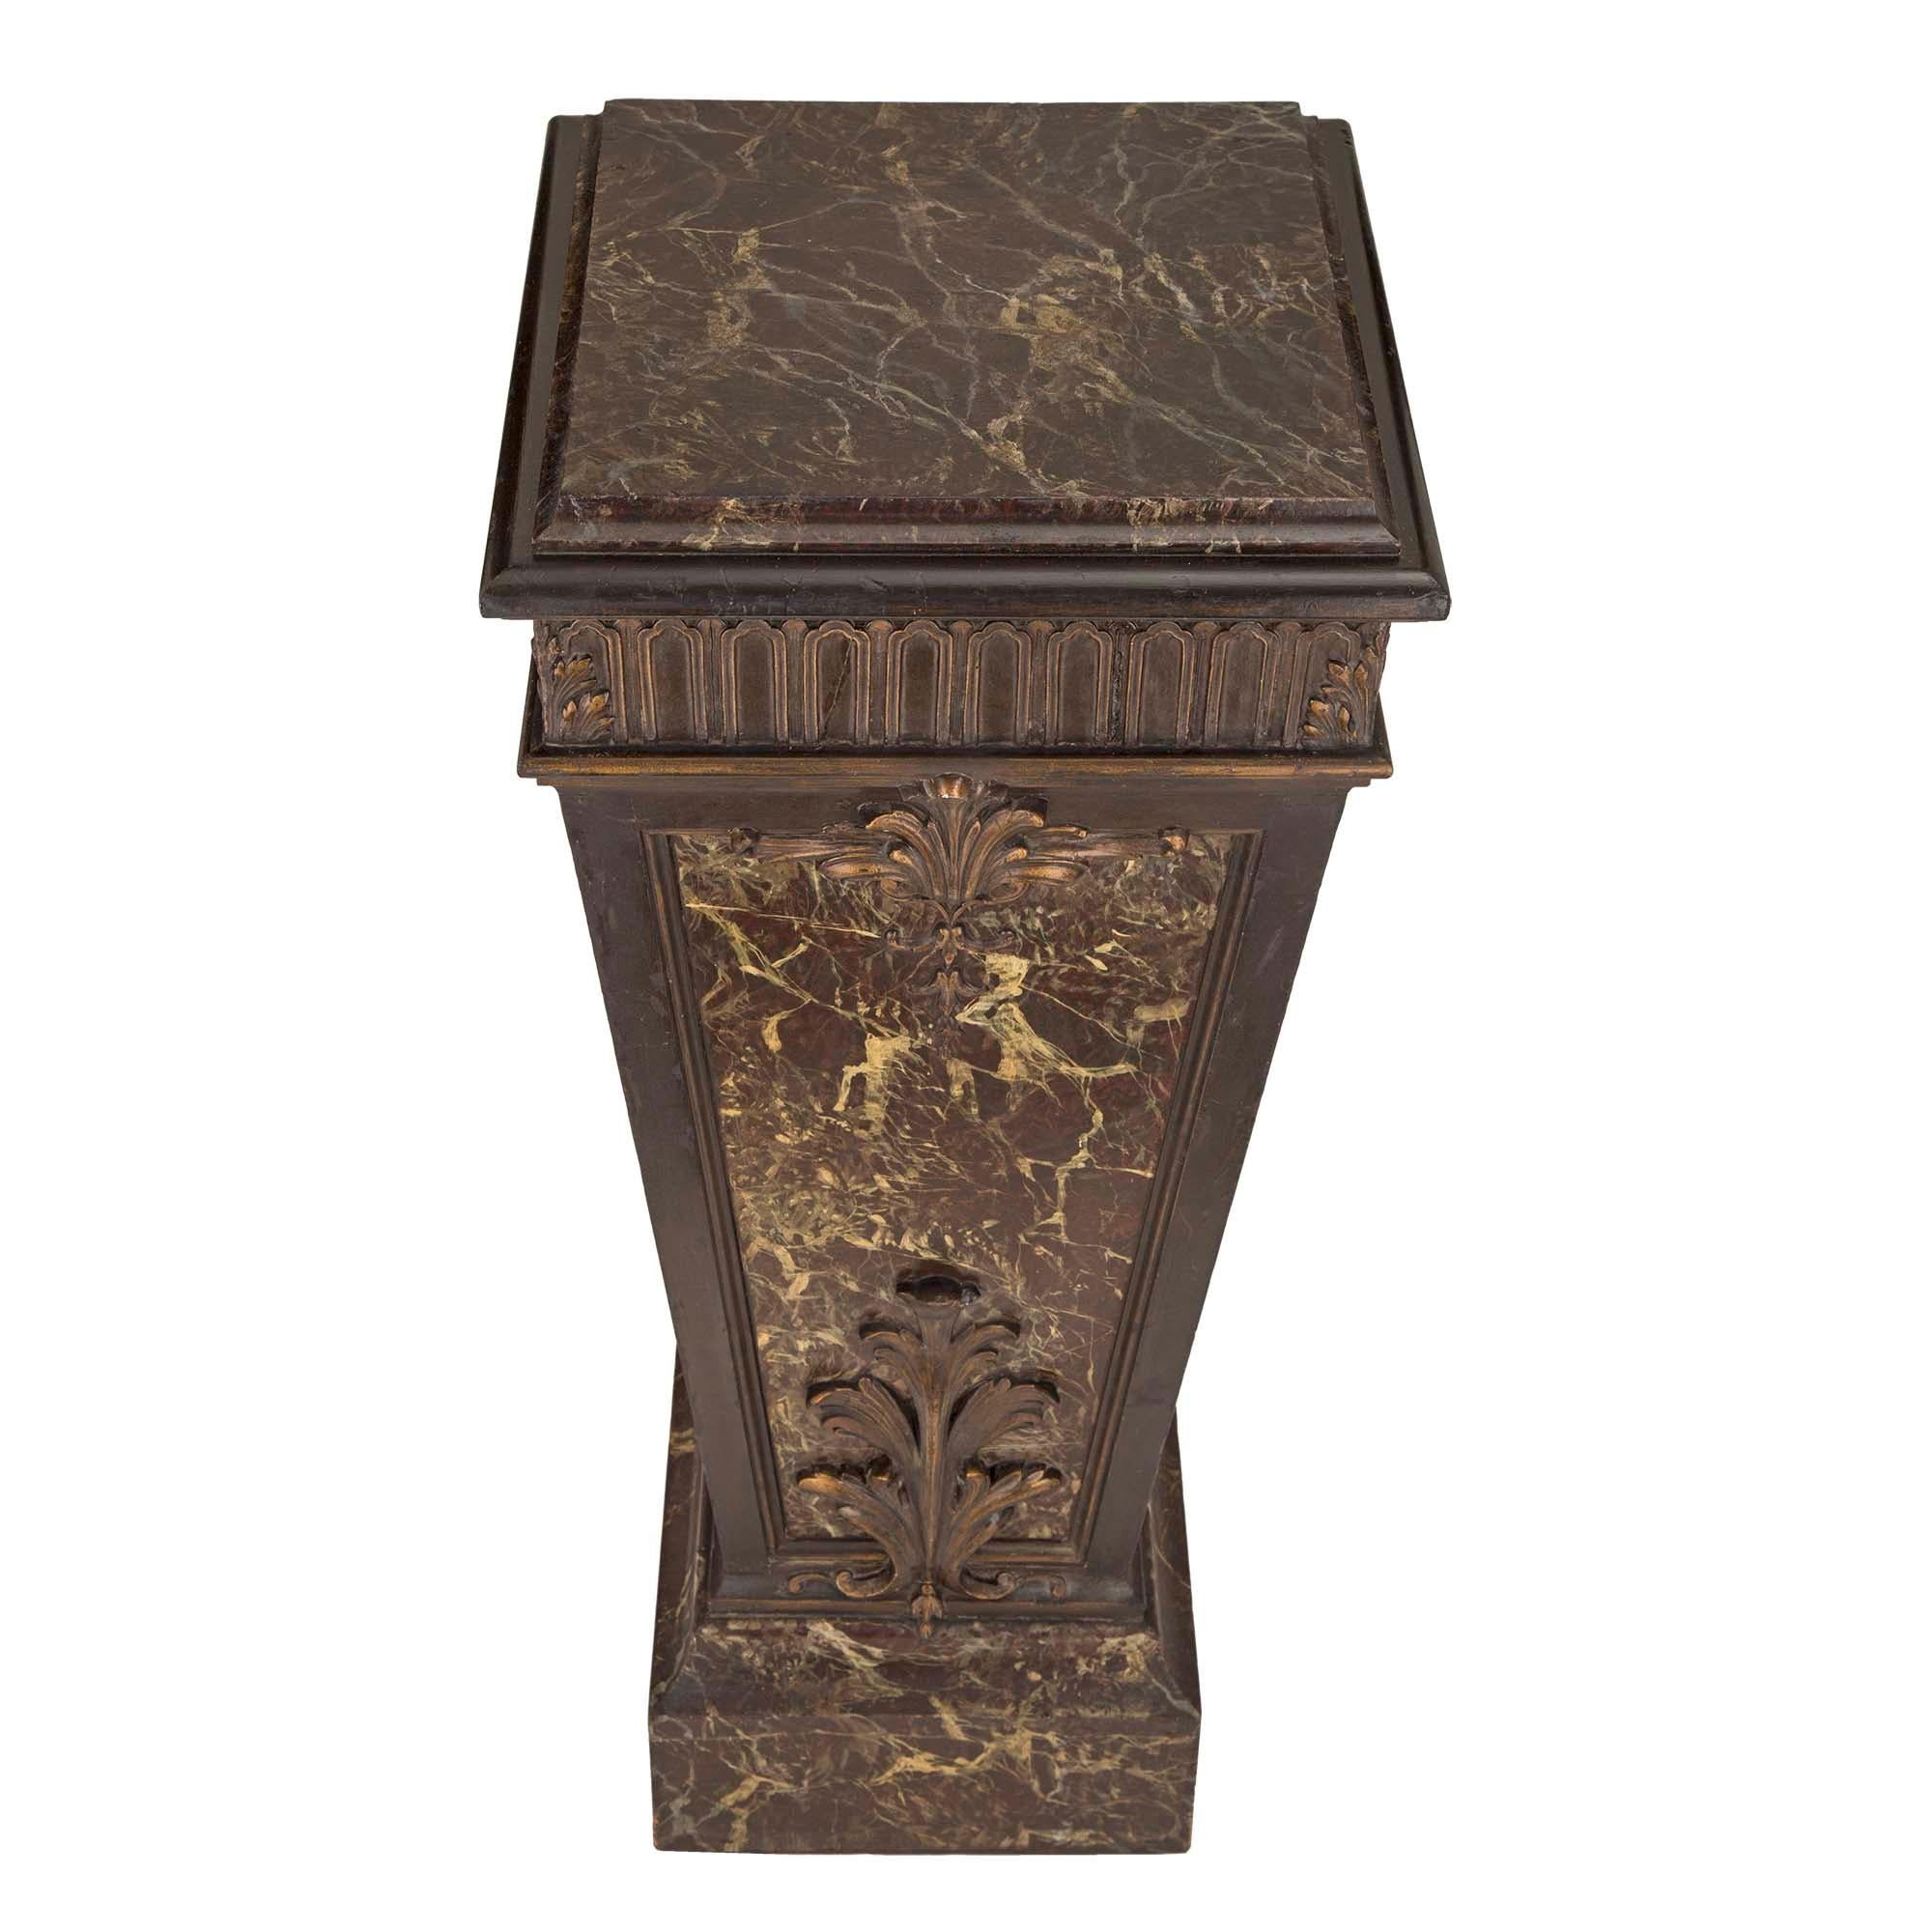 A very decorative French 19th century Louis XVI st. faux marble and patinated pedestal. The pedestal is raised on a square base below the tapered column. The pedestal has paneled sides with faux marble designs centered within patinated borders. At